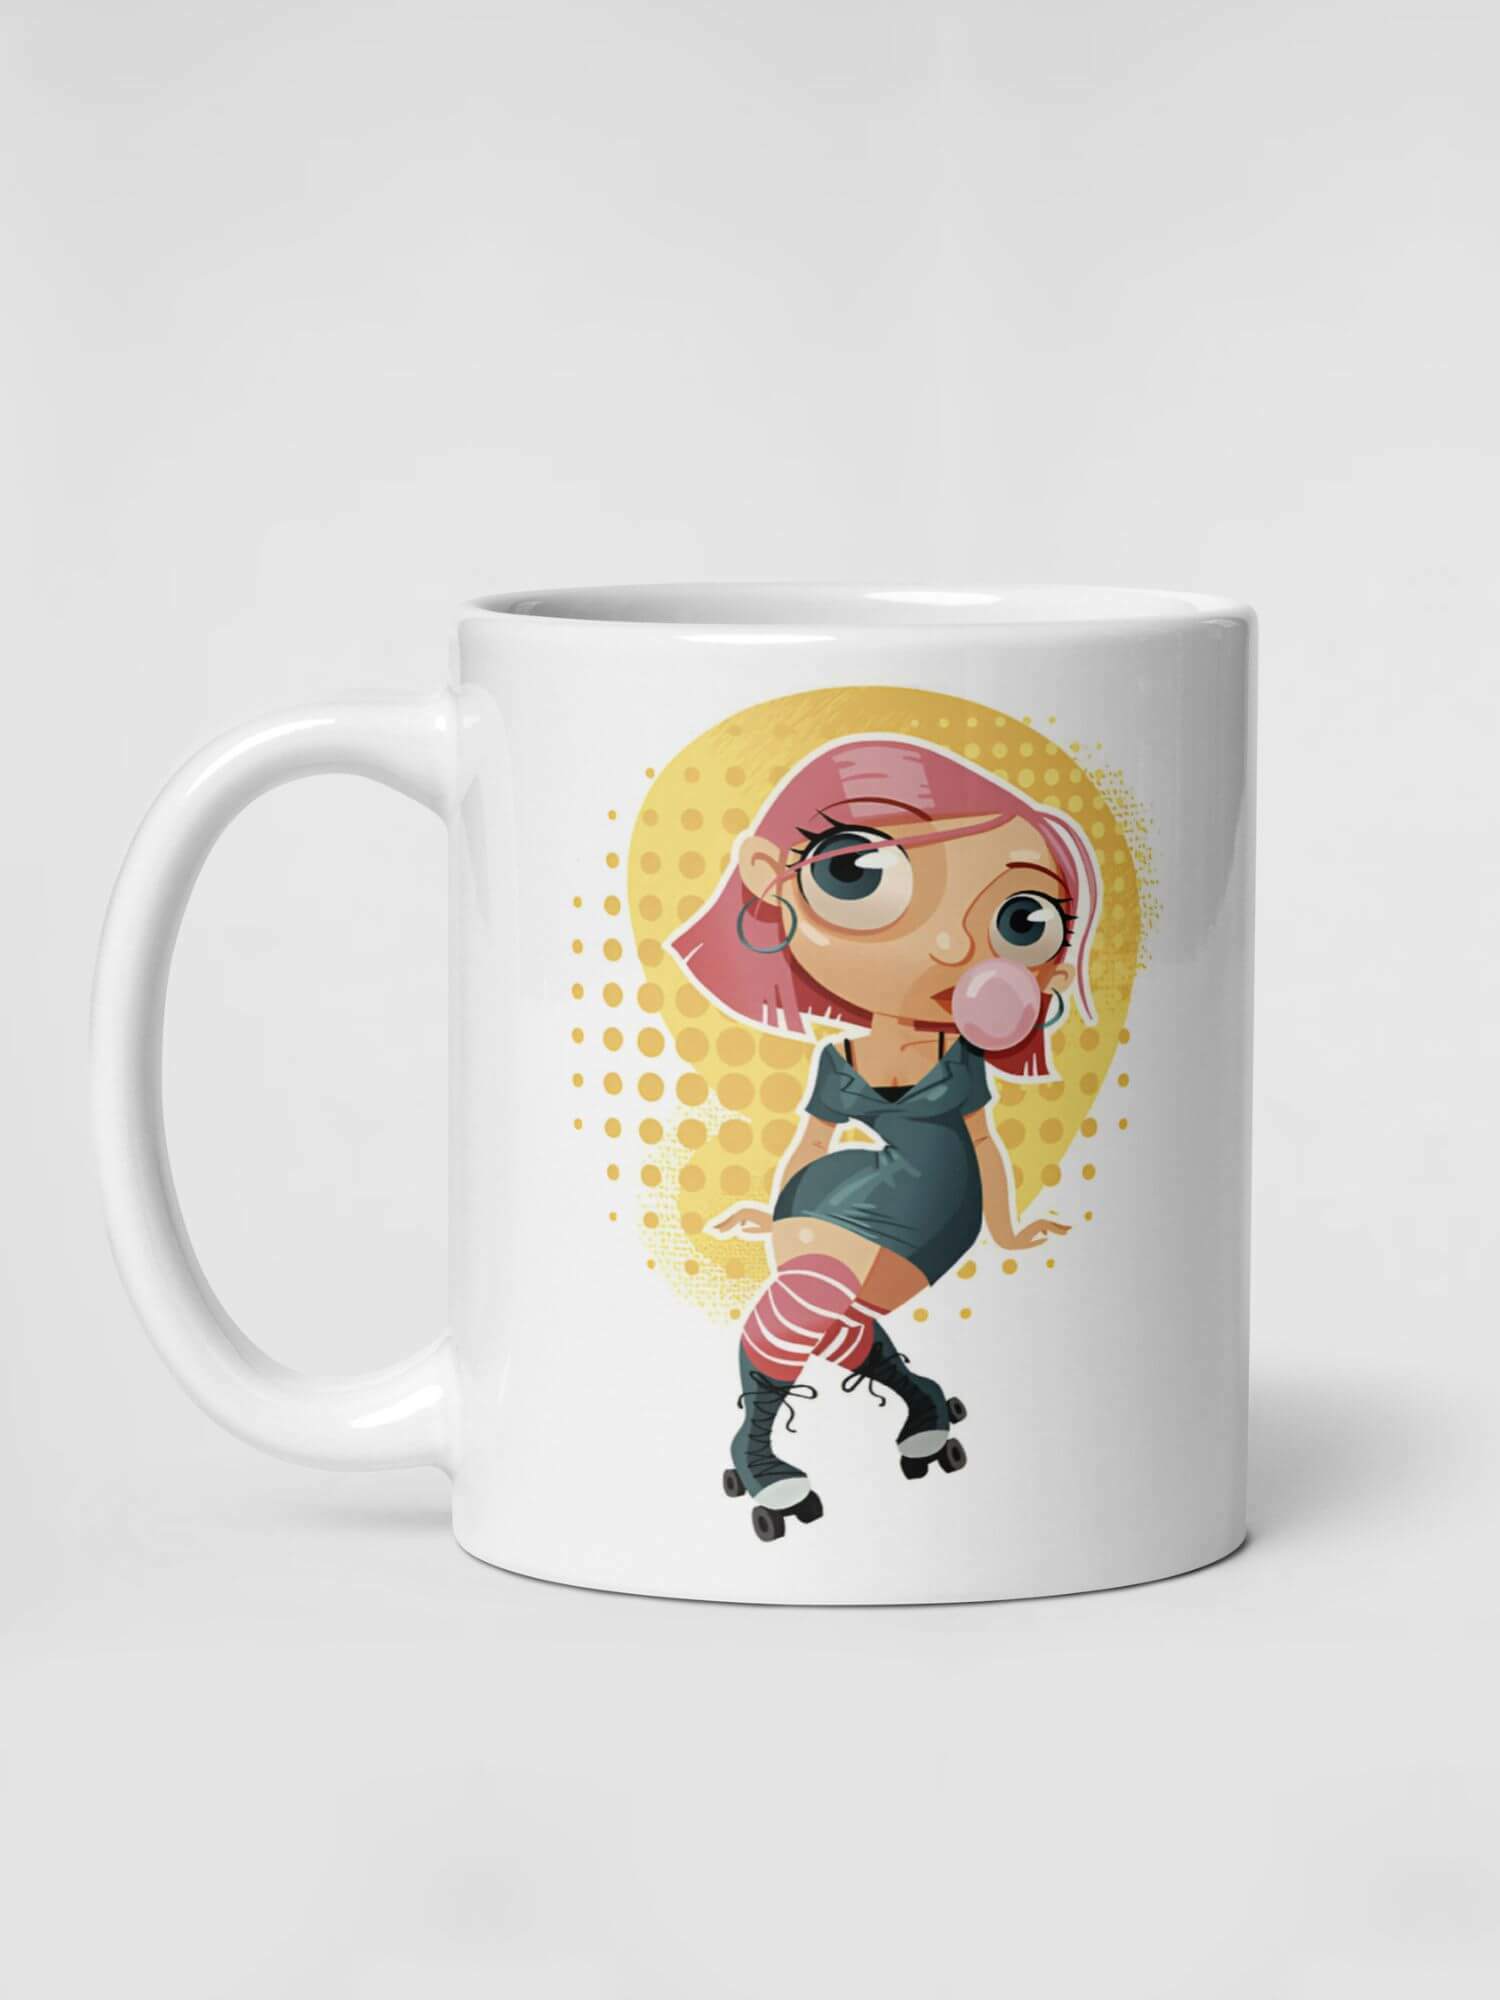 Glossy Rollerchick Mug       Japan Cartoon roller skater girl character drinks cup coffee, tea, juice, milk drinking cups miteigi branded product item tumblers ceramics in white with yellow green multicolor pattern Ceramic Anime Gifts girls skates roller-skating chicks rollerblades Japanese souvenirs mugs